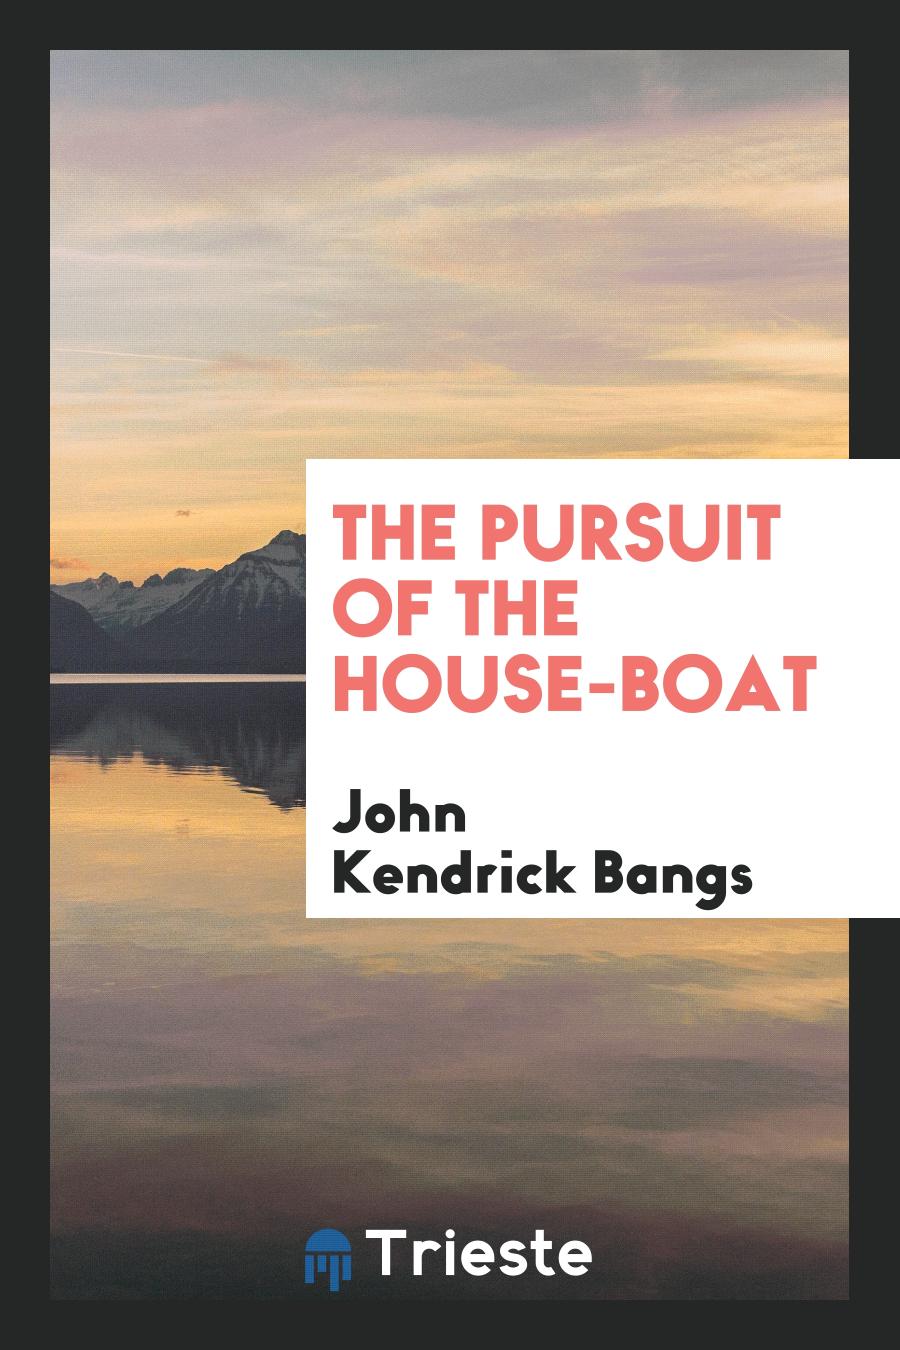 John Kendrick Bangs - The pursuit of the house-boat